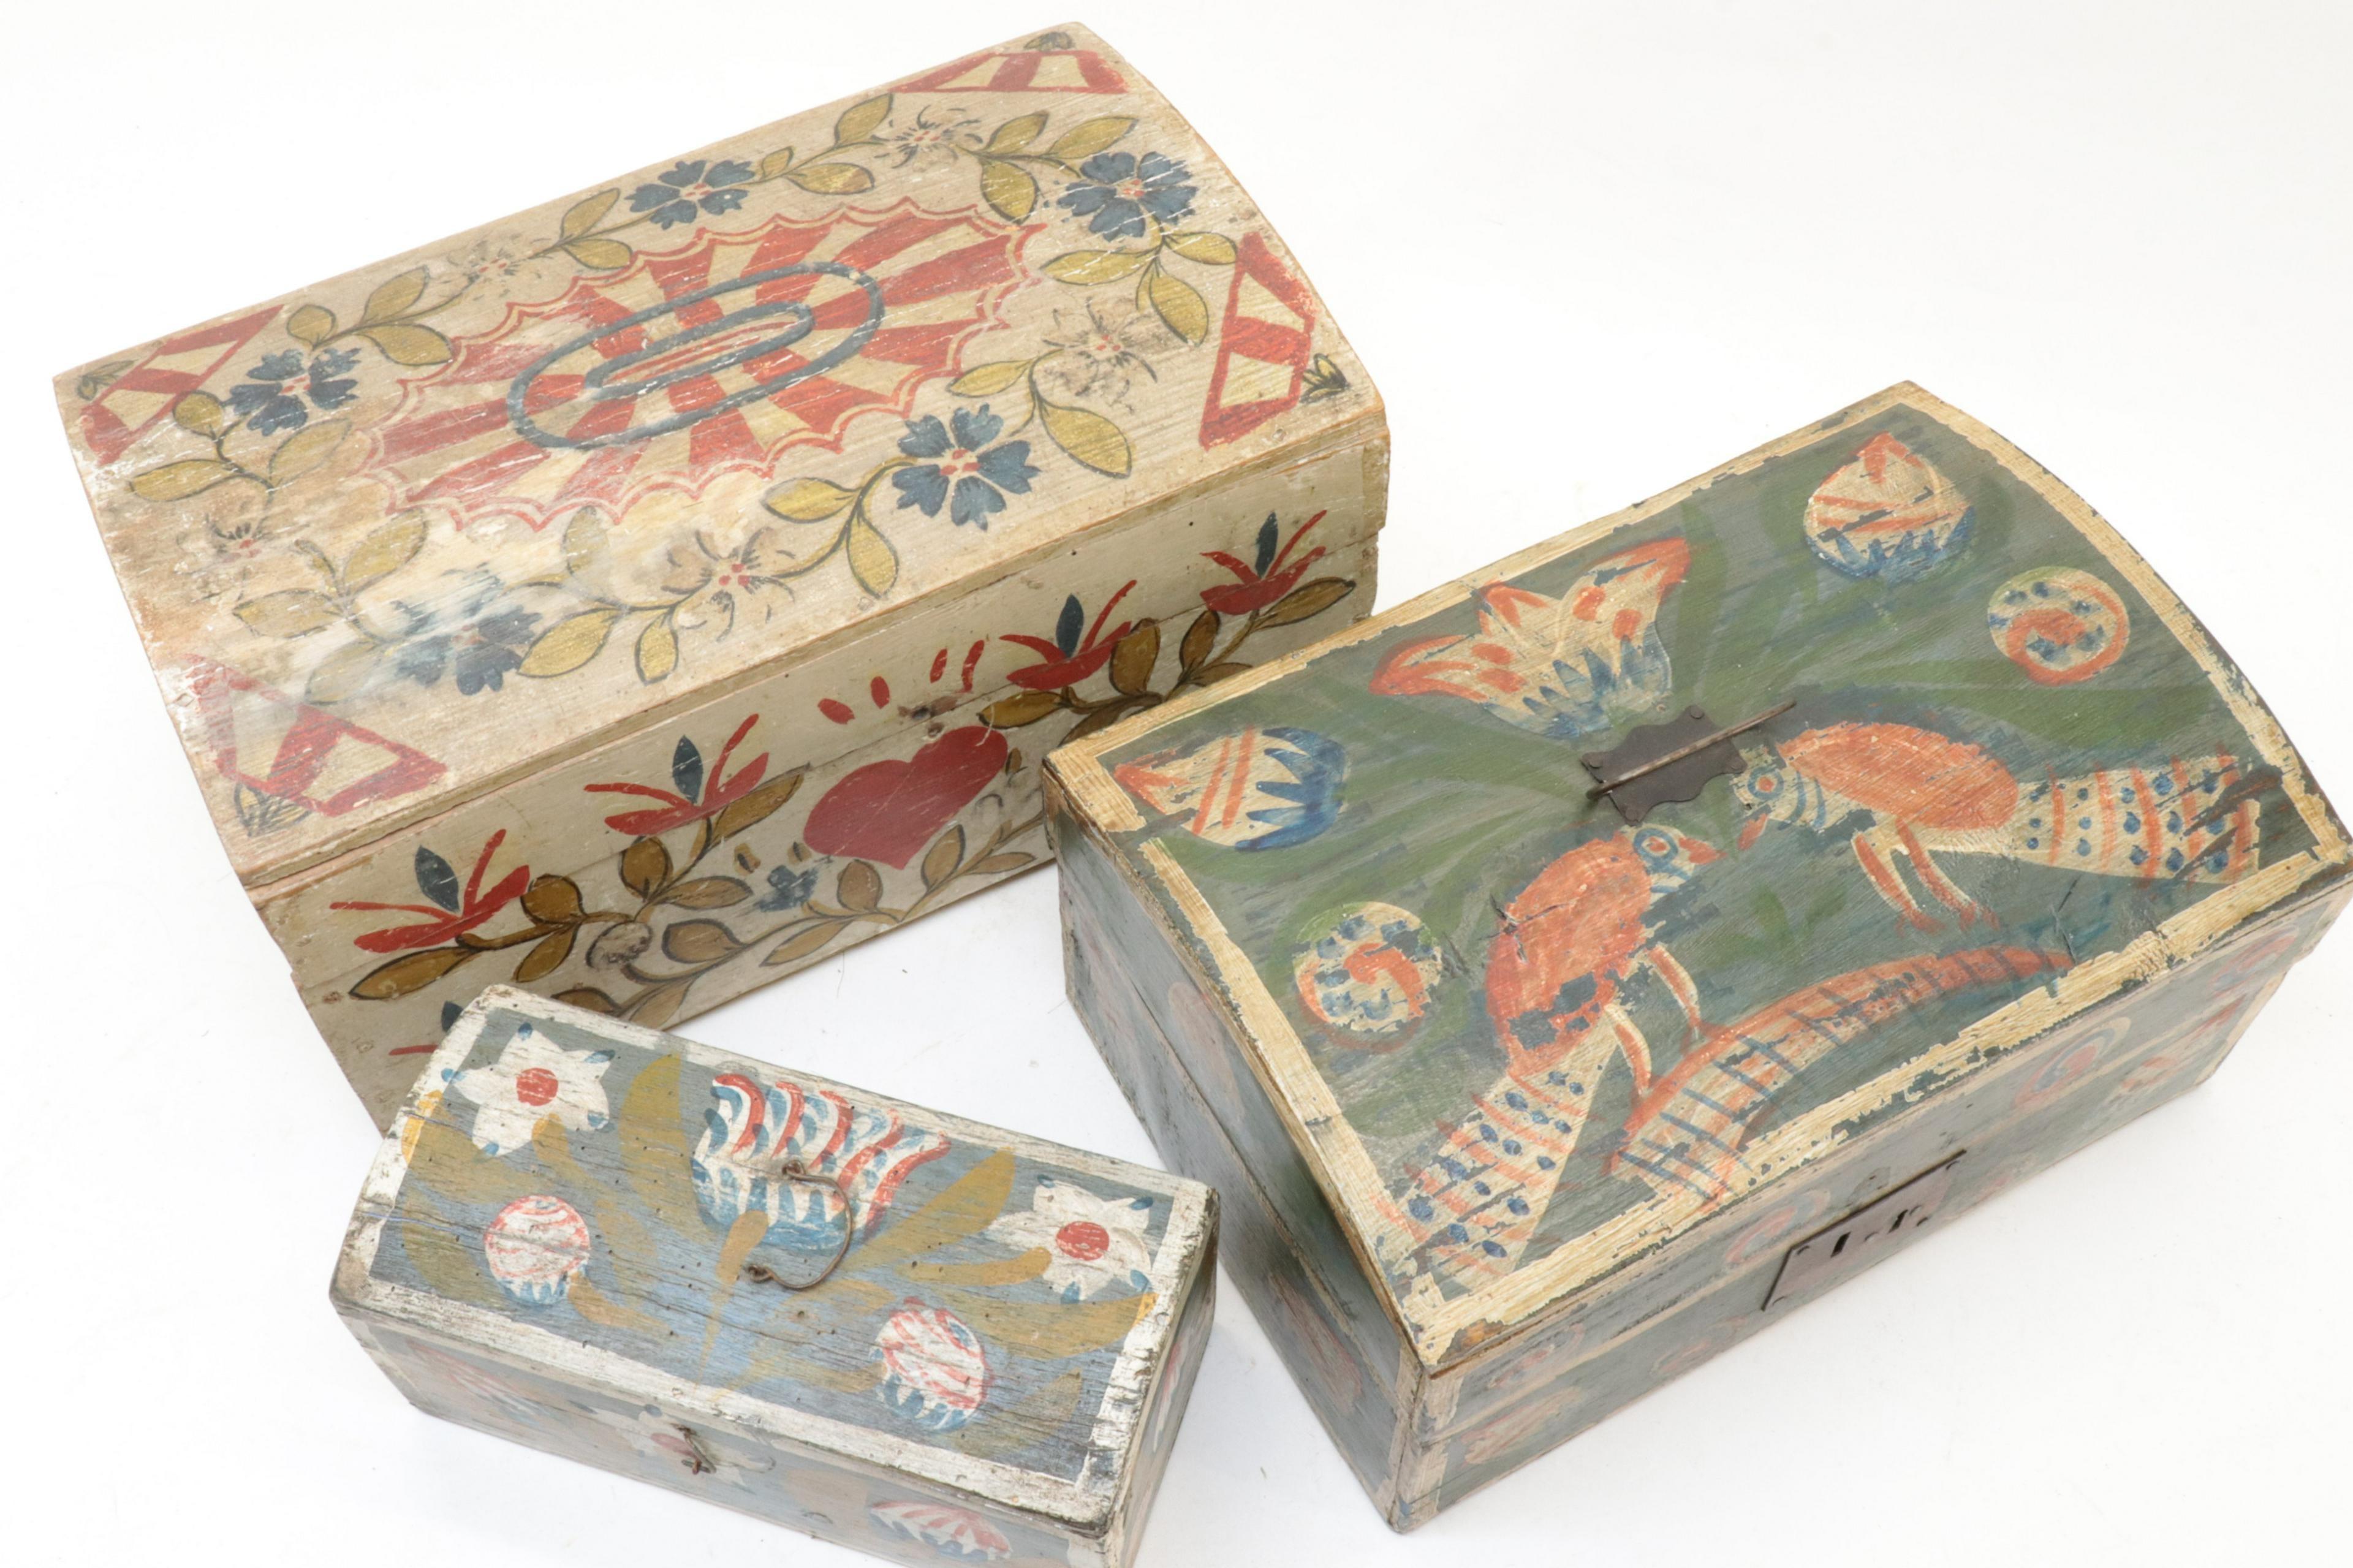 Three early 19th century French Folk Art painted dome-top wedding boxes in beech, decorated with painted flowers, swags, hearts and other motifs. These were traditional filled with linens and other soft goods and given to a bride on her wedding